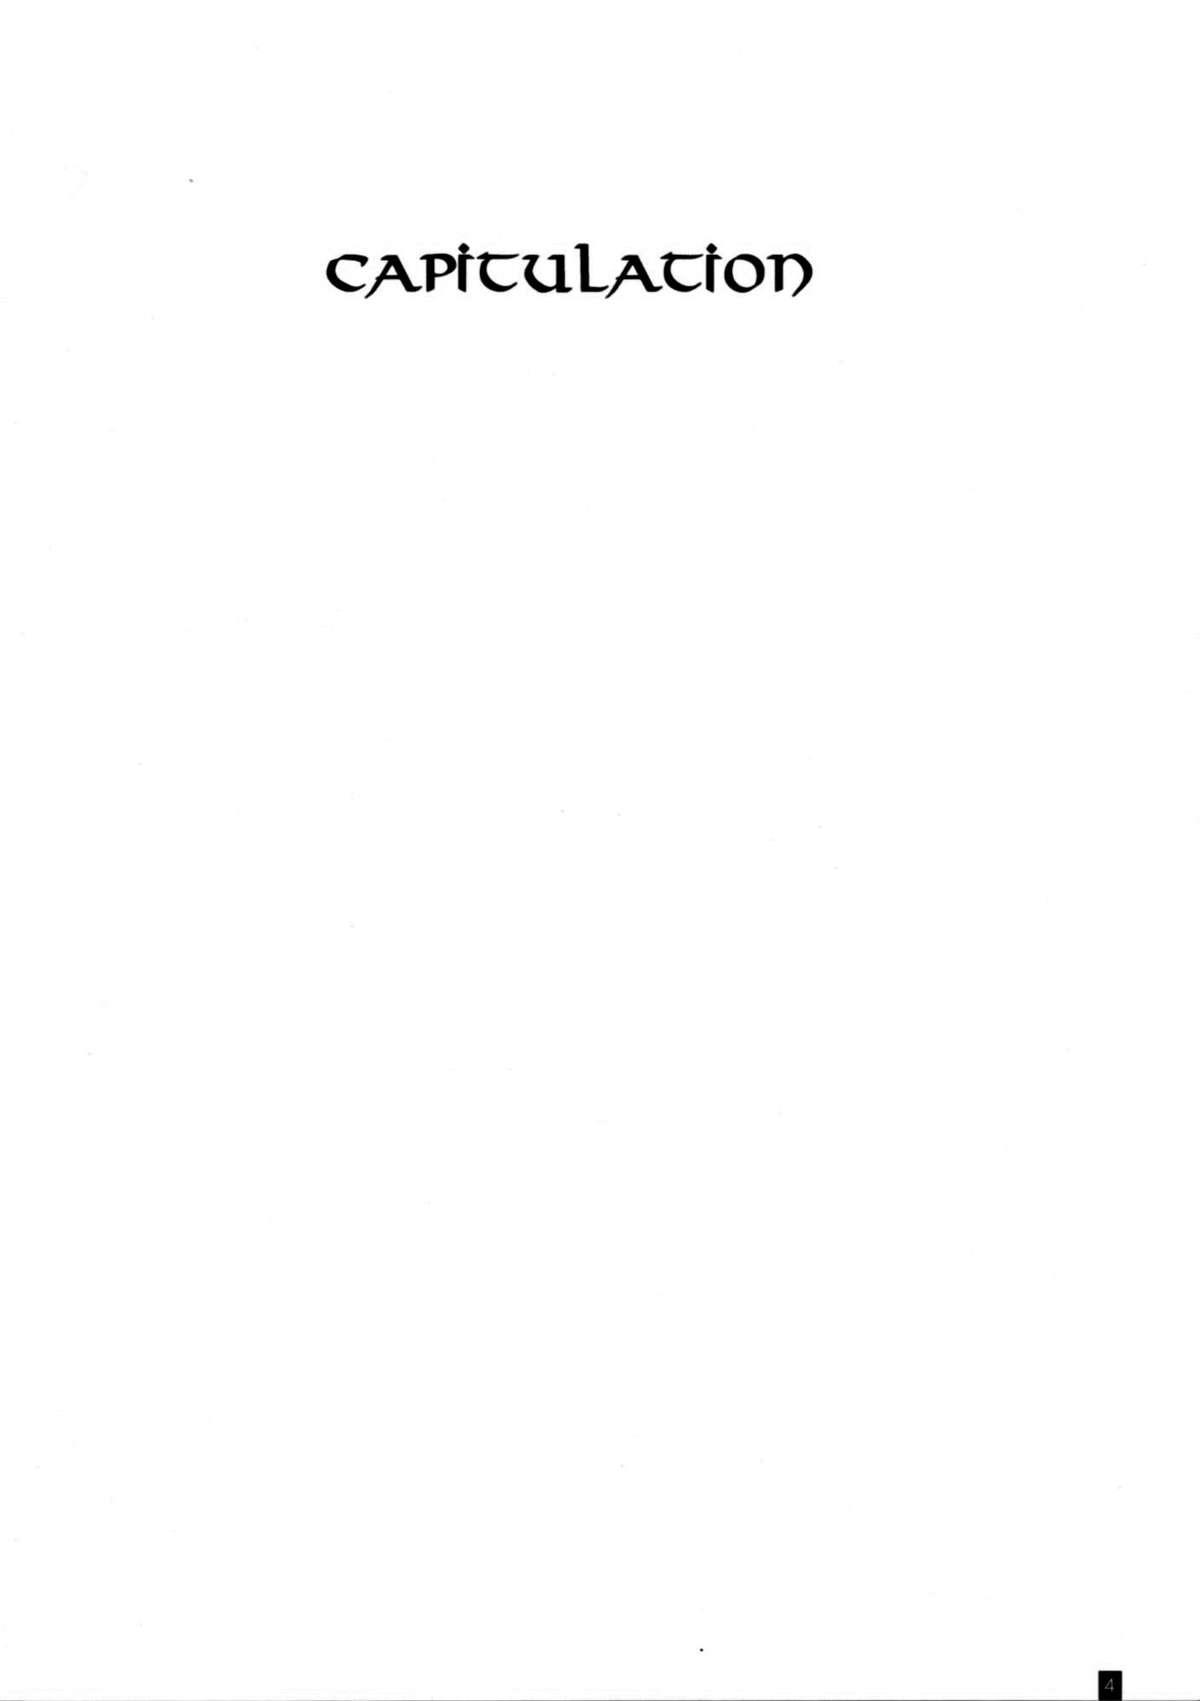 CAPITULATION 2